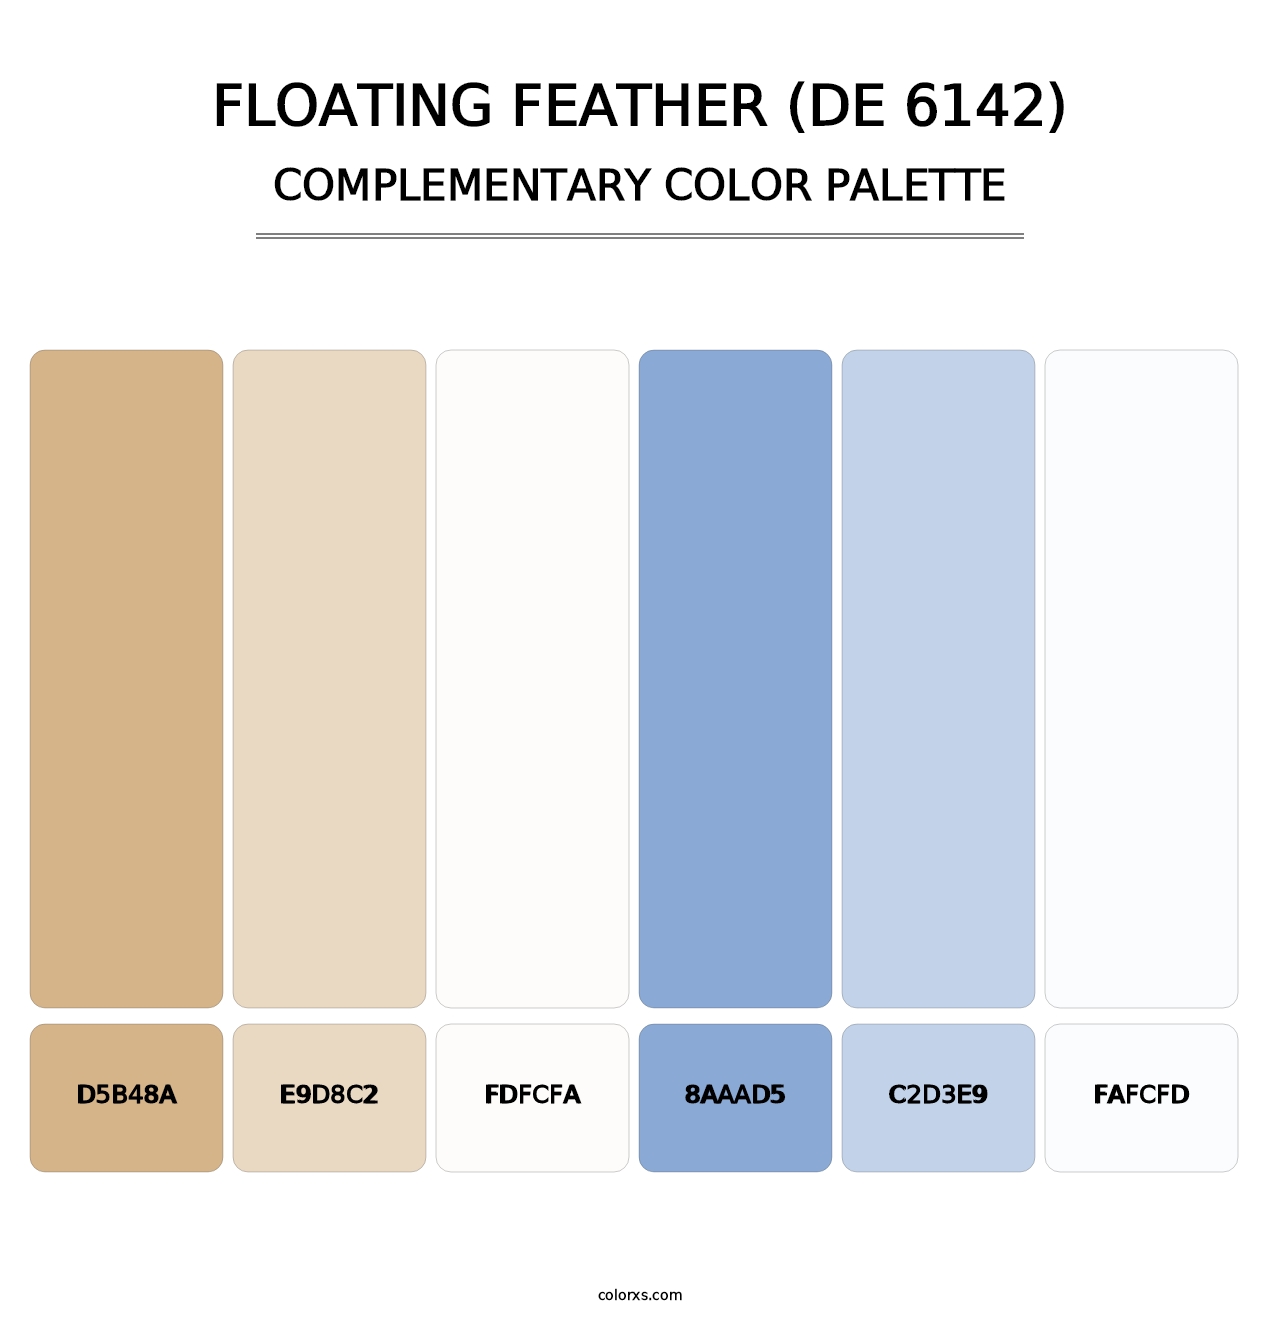 Floating Feather (DE 6142) - Complementary Color Palette